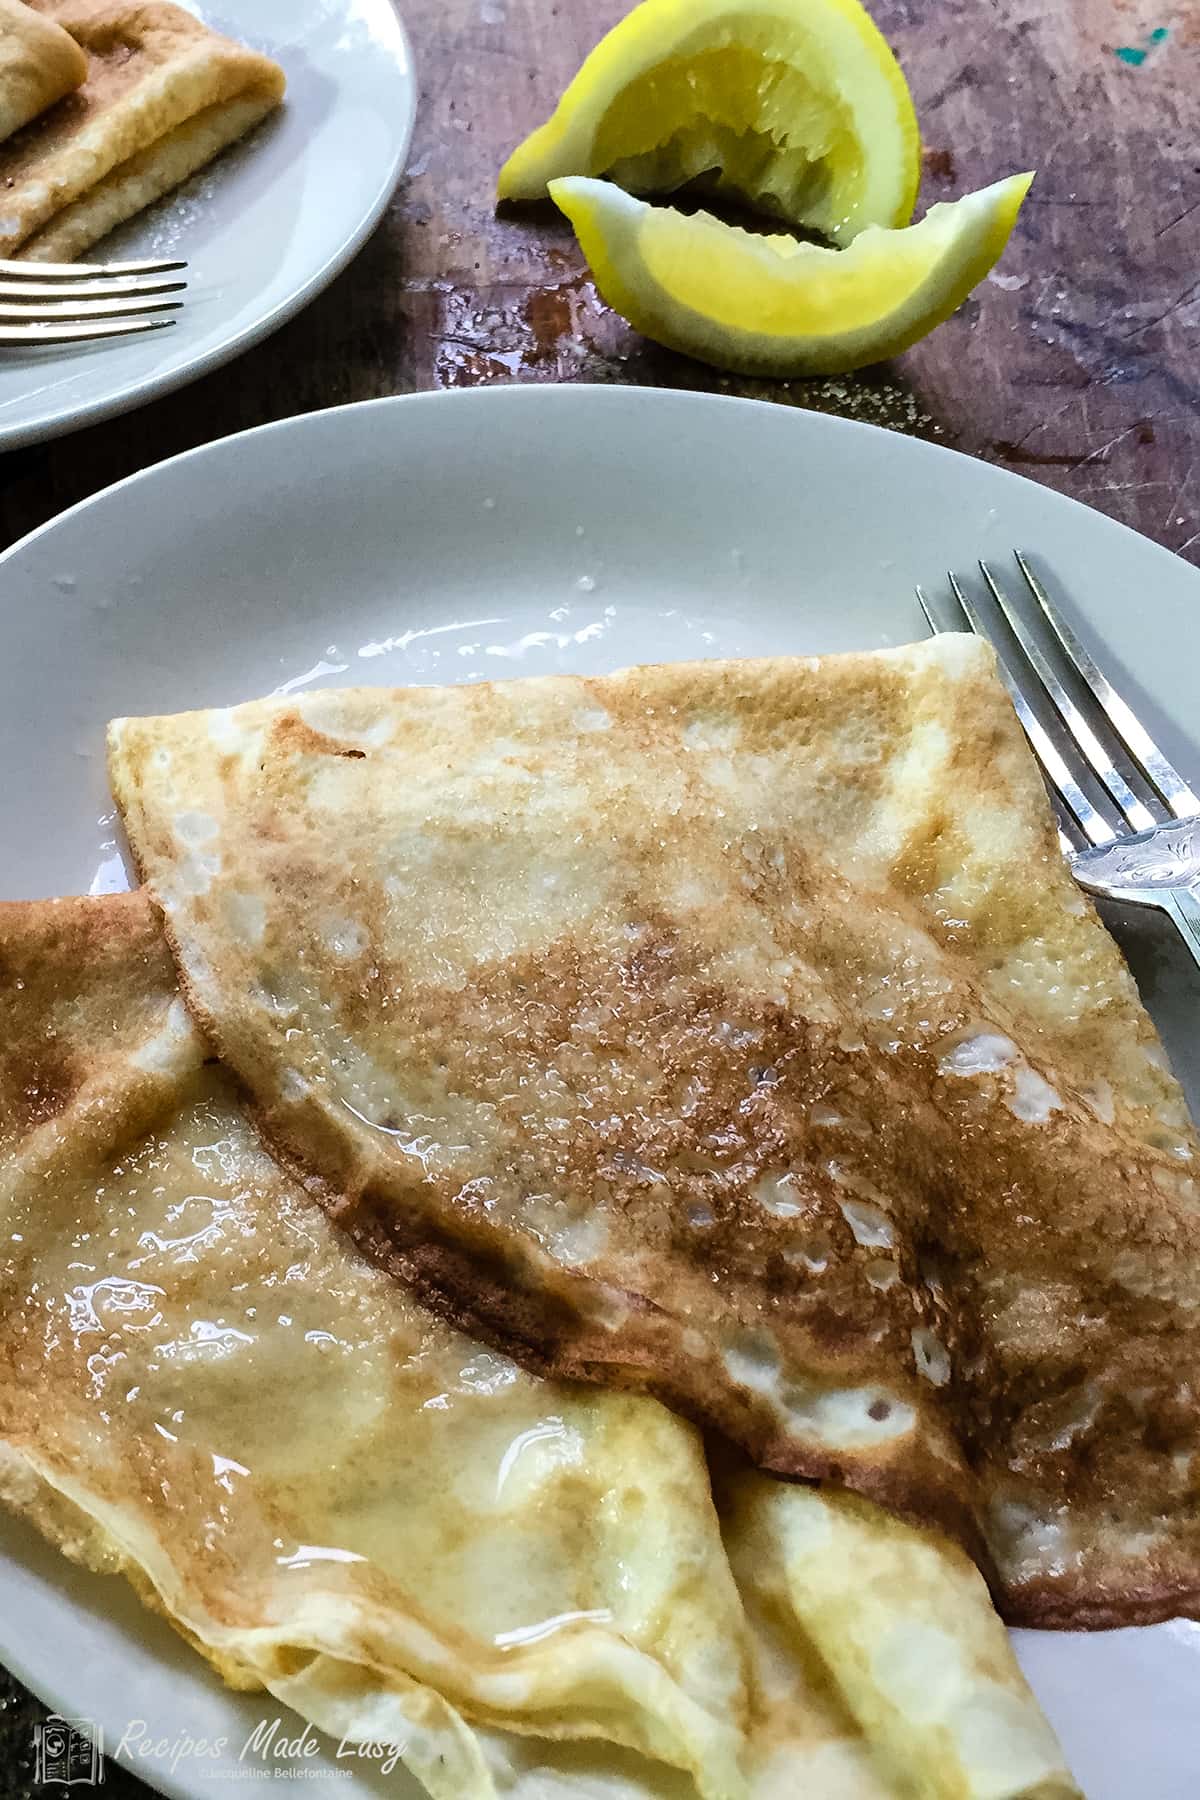 two English pancakes on a plate with squeeze lemon wedges behind.